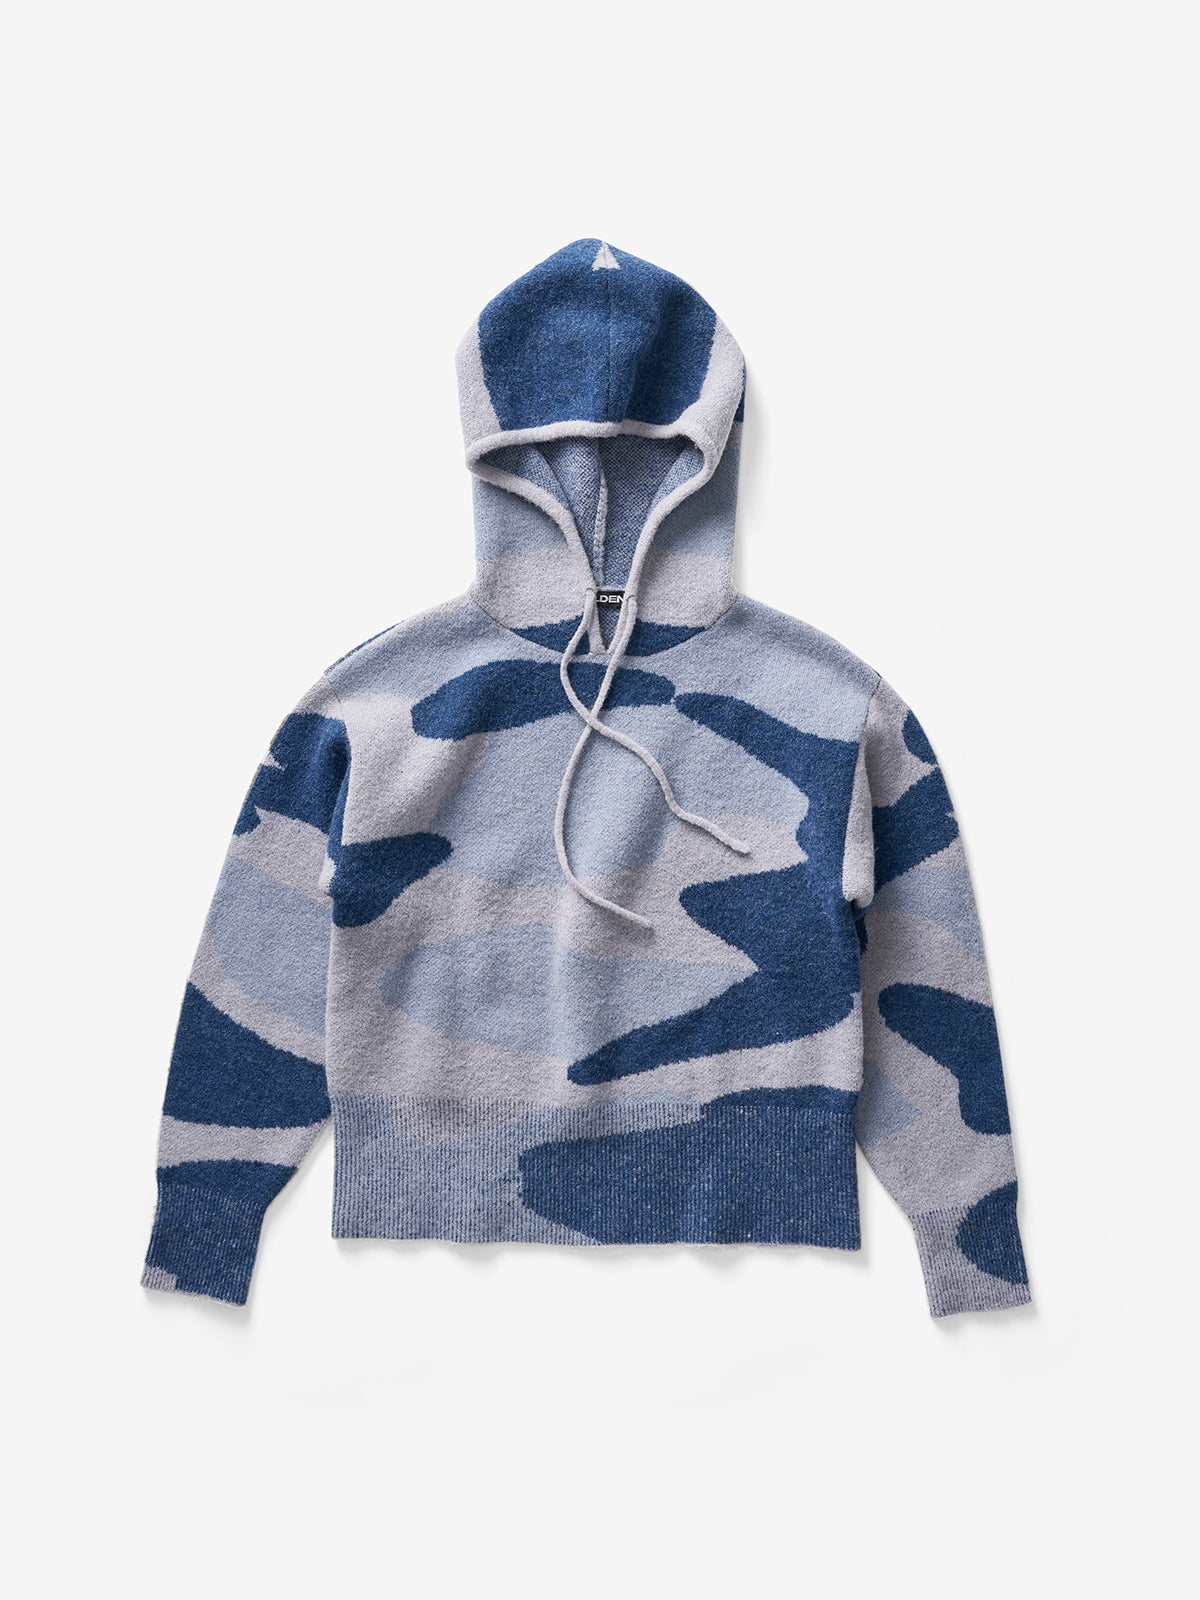 CHALET HOODIE - Blue Fog Camo - flat lay - front